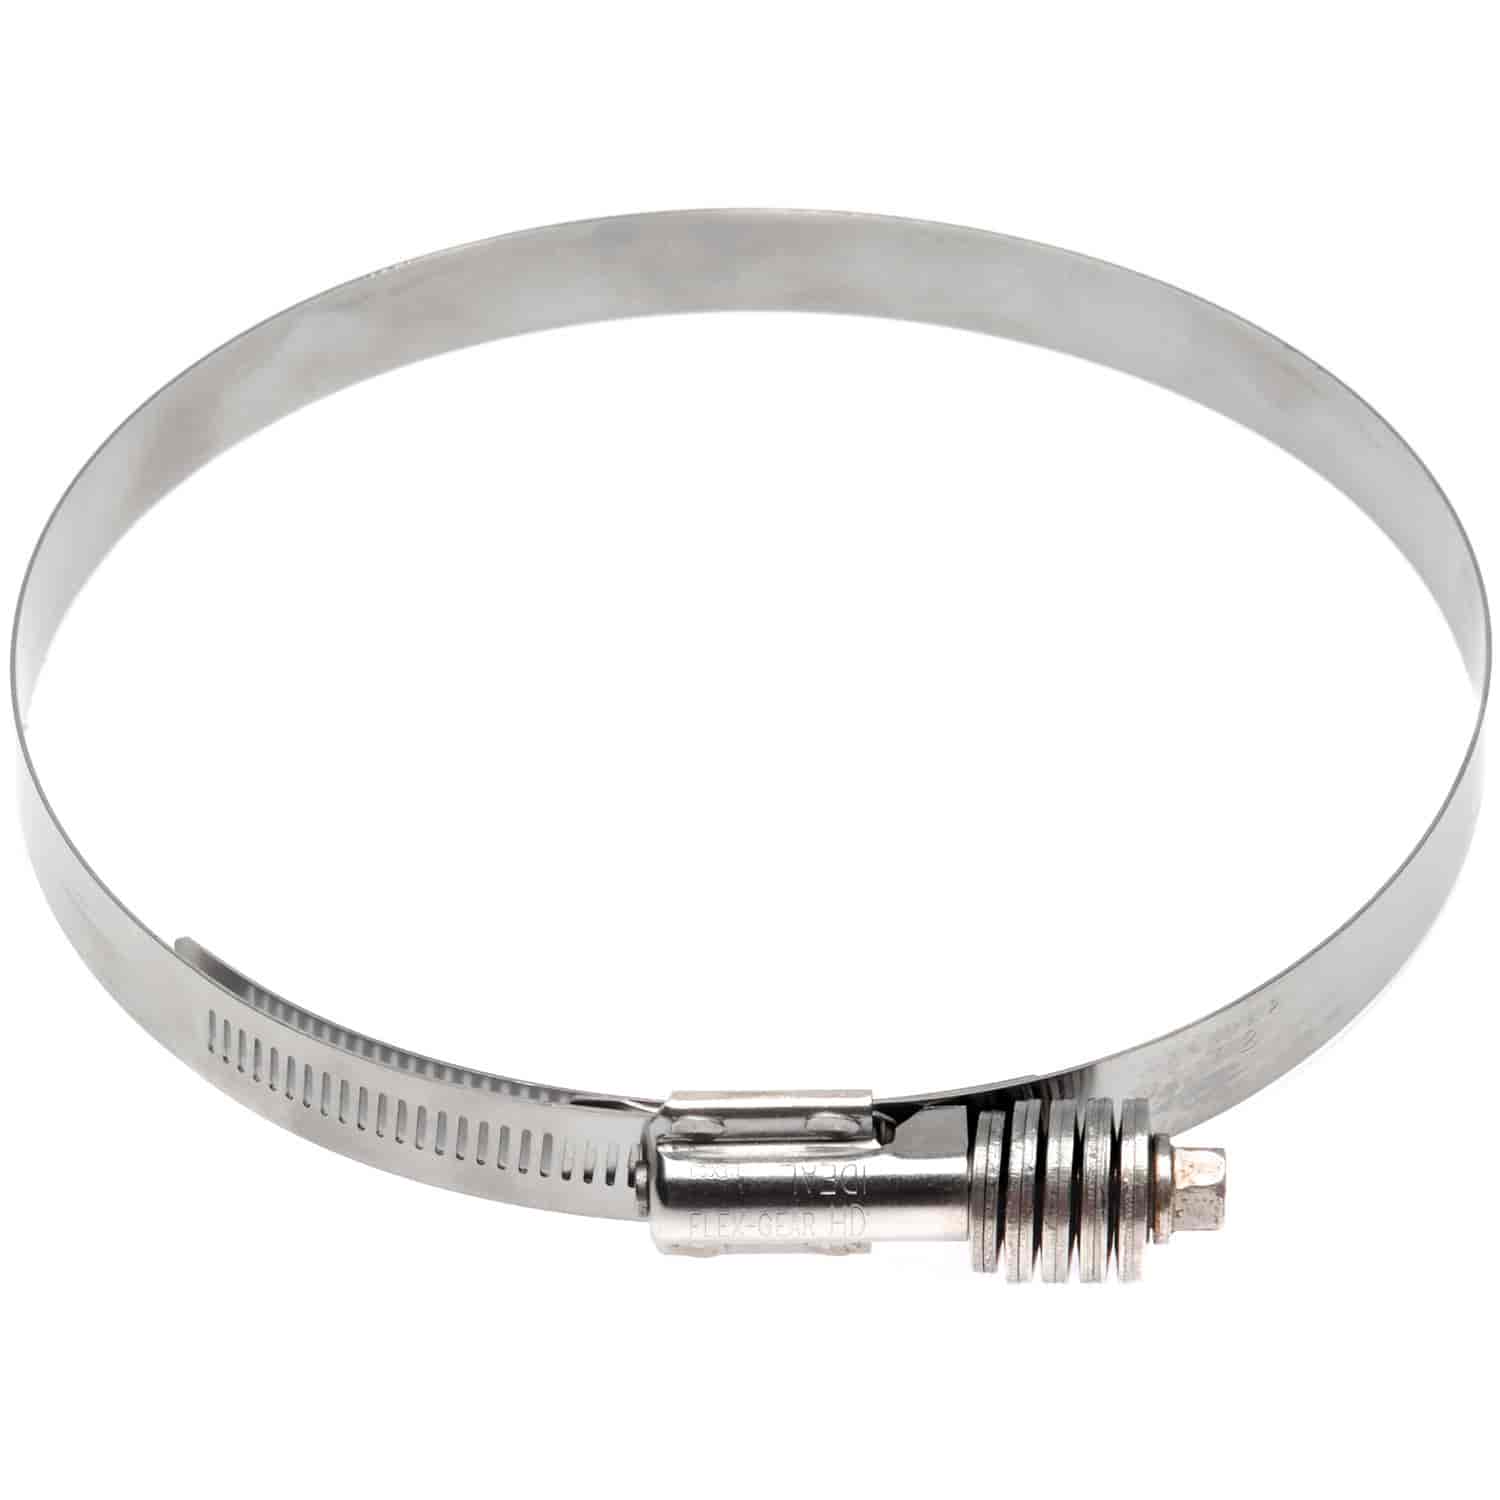 Stainless Steel Marine Hose Clamp [8.125 in. to 7.250 in. Outside Diameter]